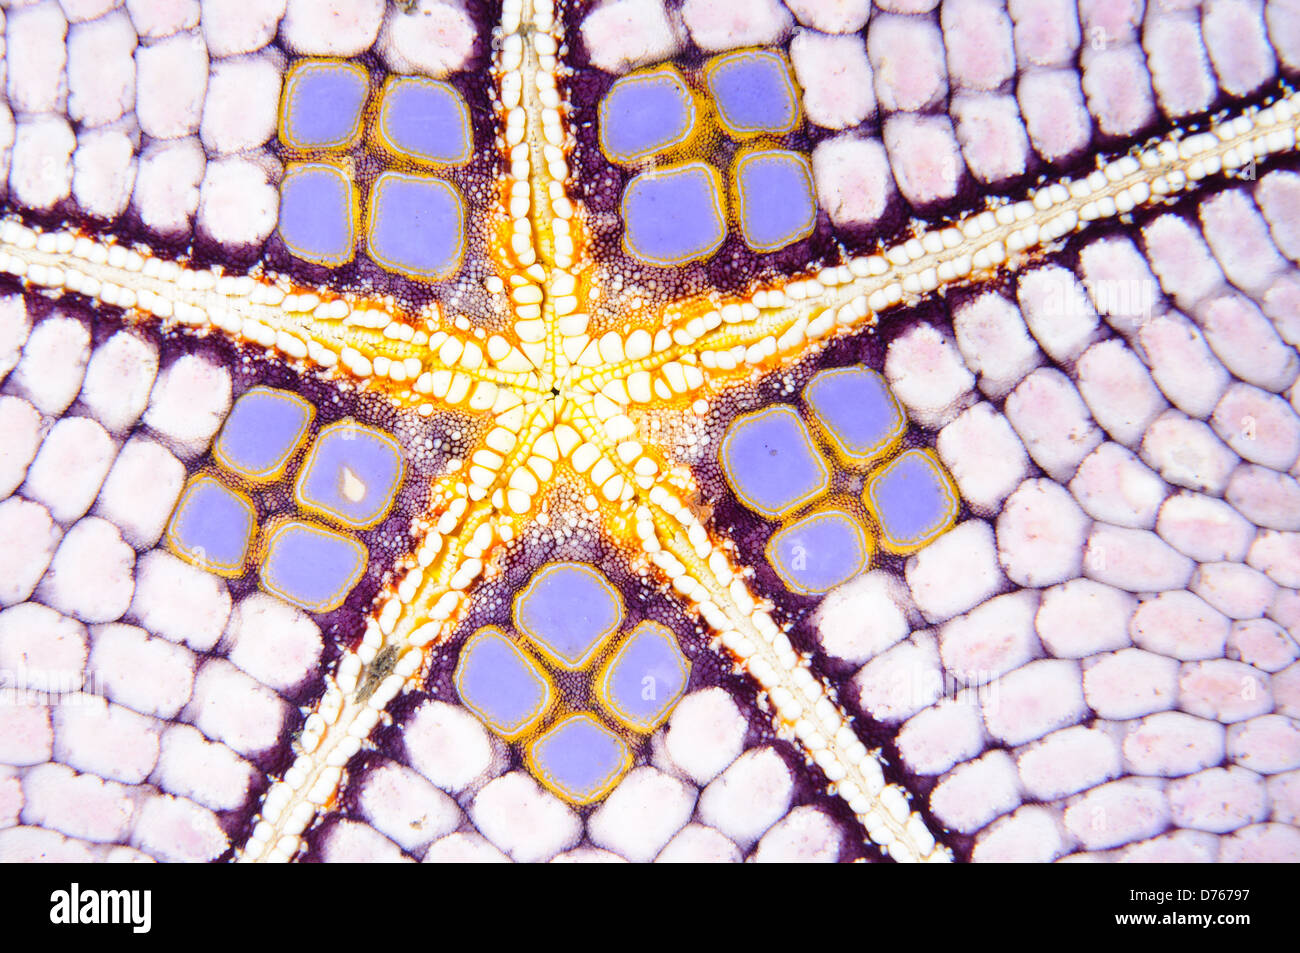 Underside of a pin-cushion starfish showing mouth, Lembeh Strait, Sulawesi, Indonesia. Stock Photo